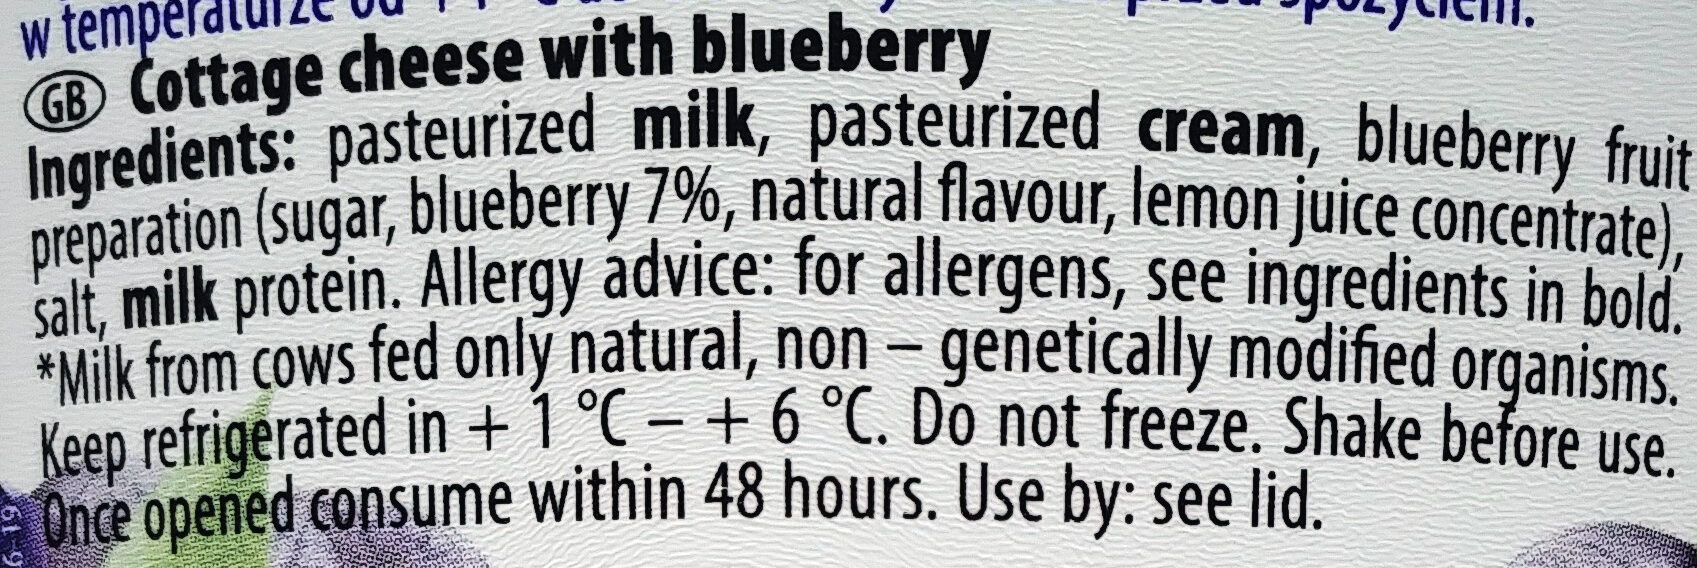 Cottage cheese with blueberry - Ingredients